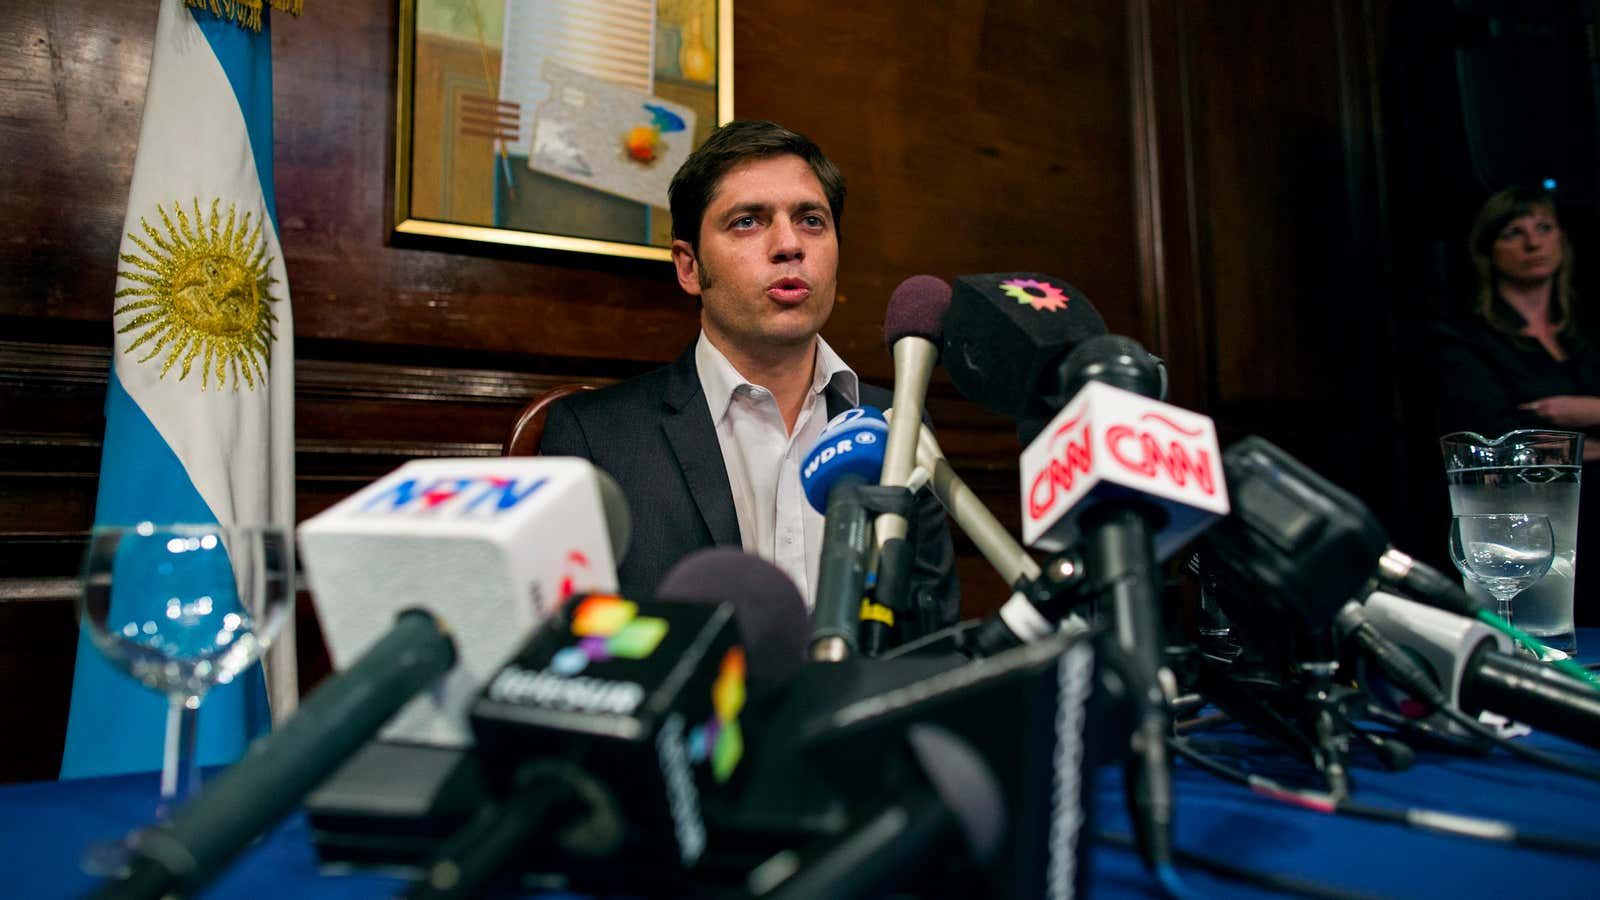 Economy minister Axel Kicillof seems to have reached a deal without reaching one.